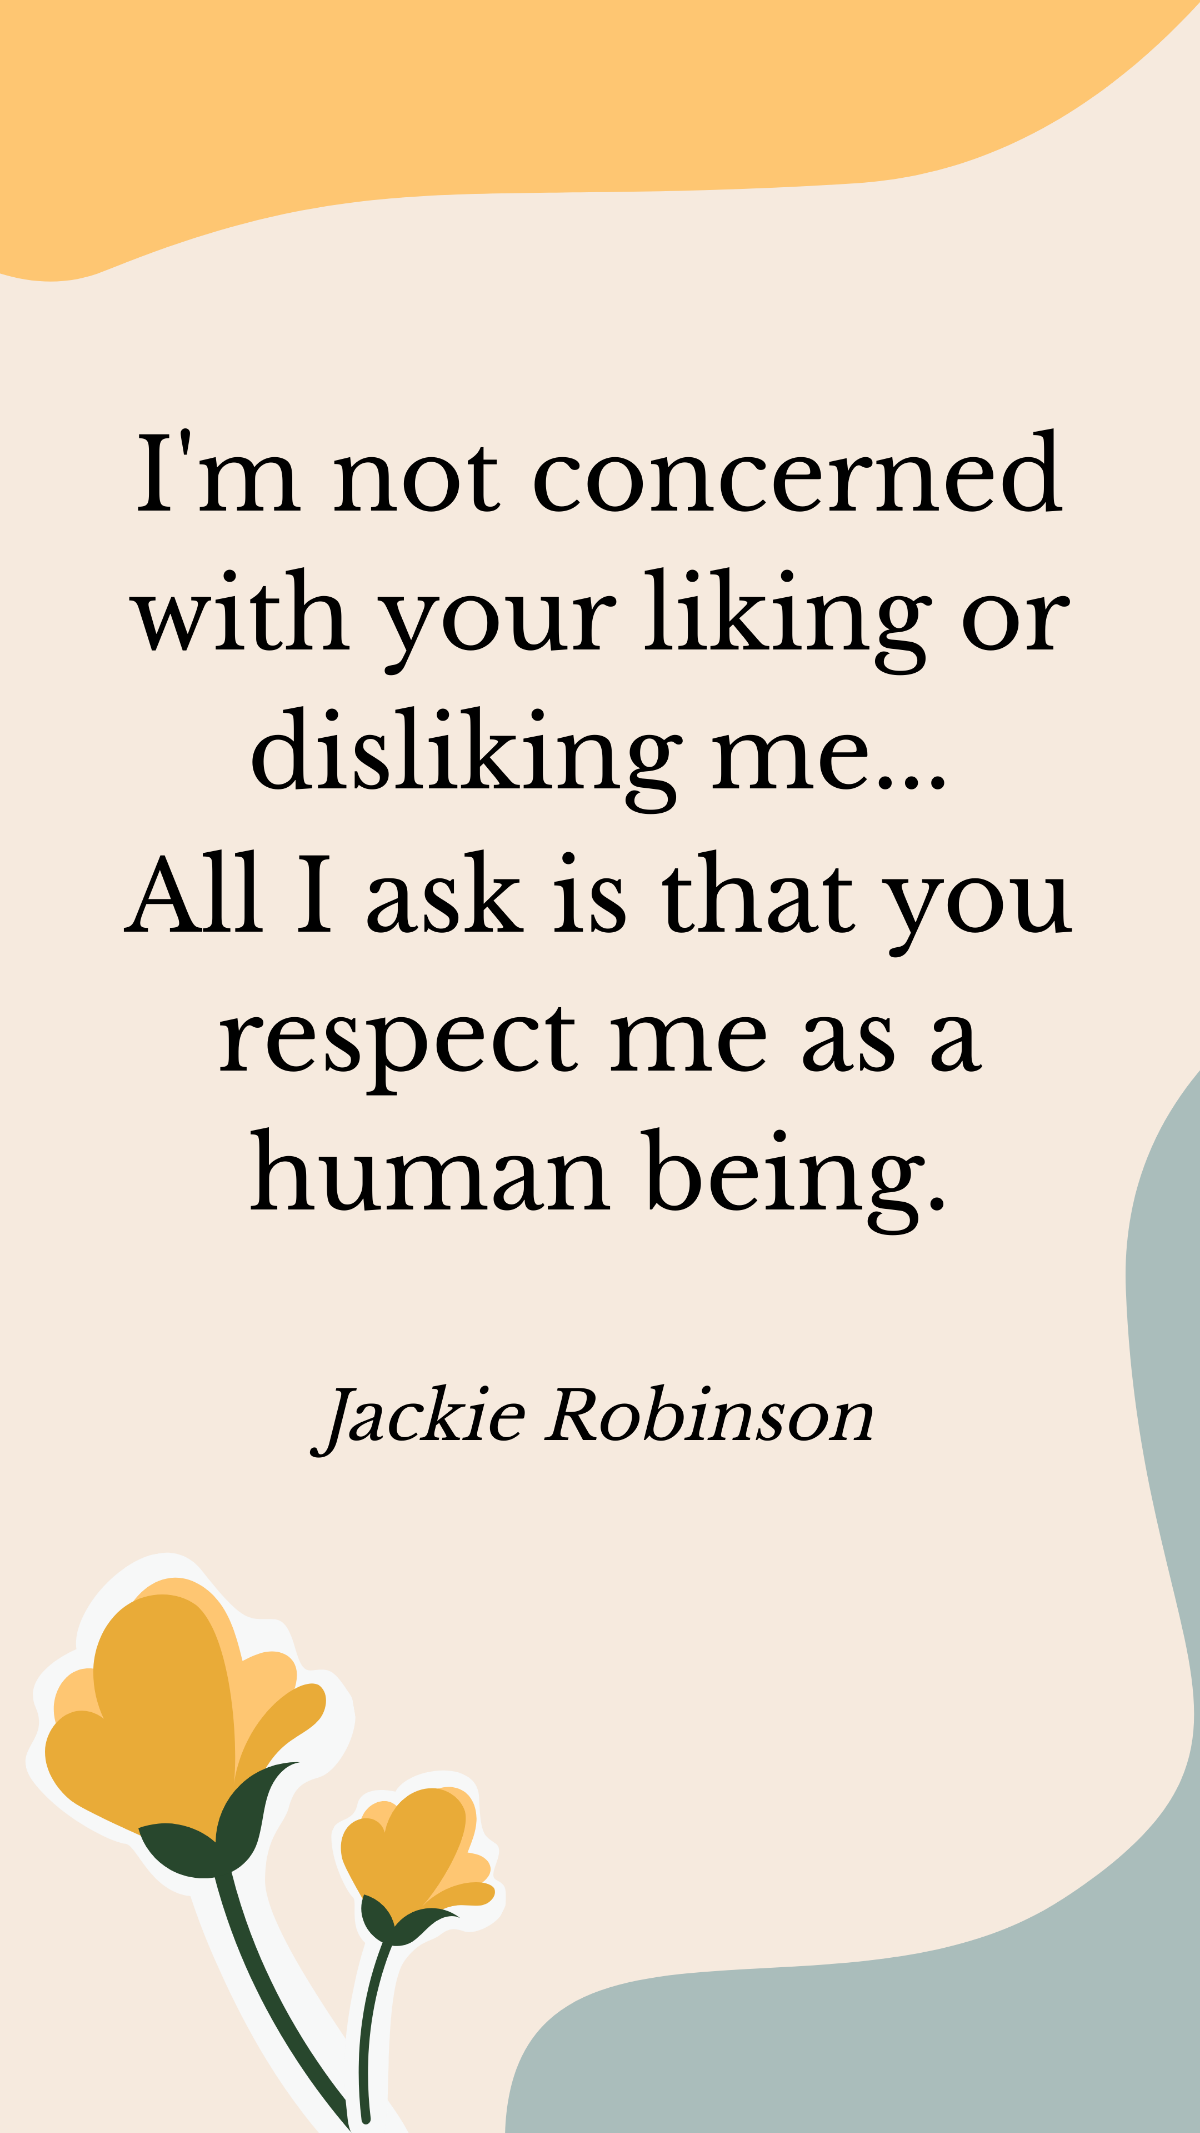 Jackie Robinson - I'm not concerned with your liking or disliking me... All I ask is that you respect me as a human being. Template